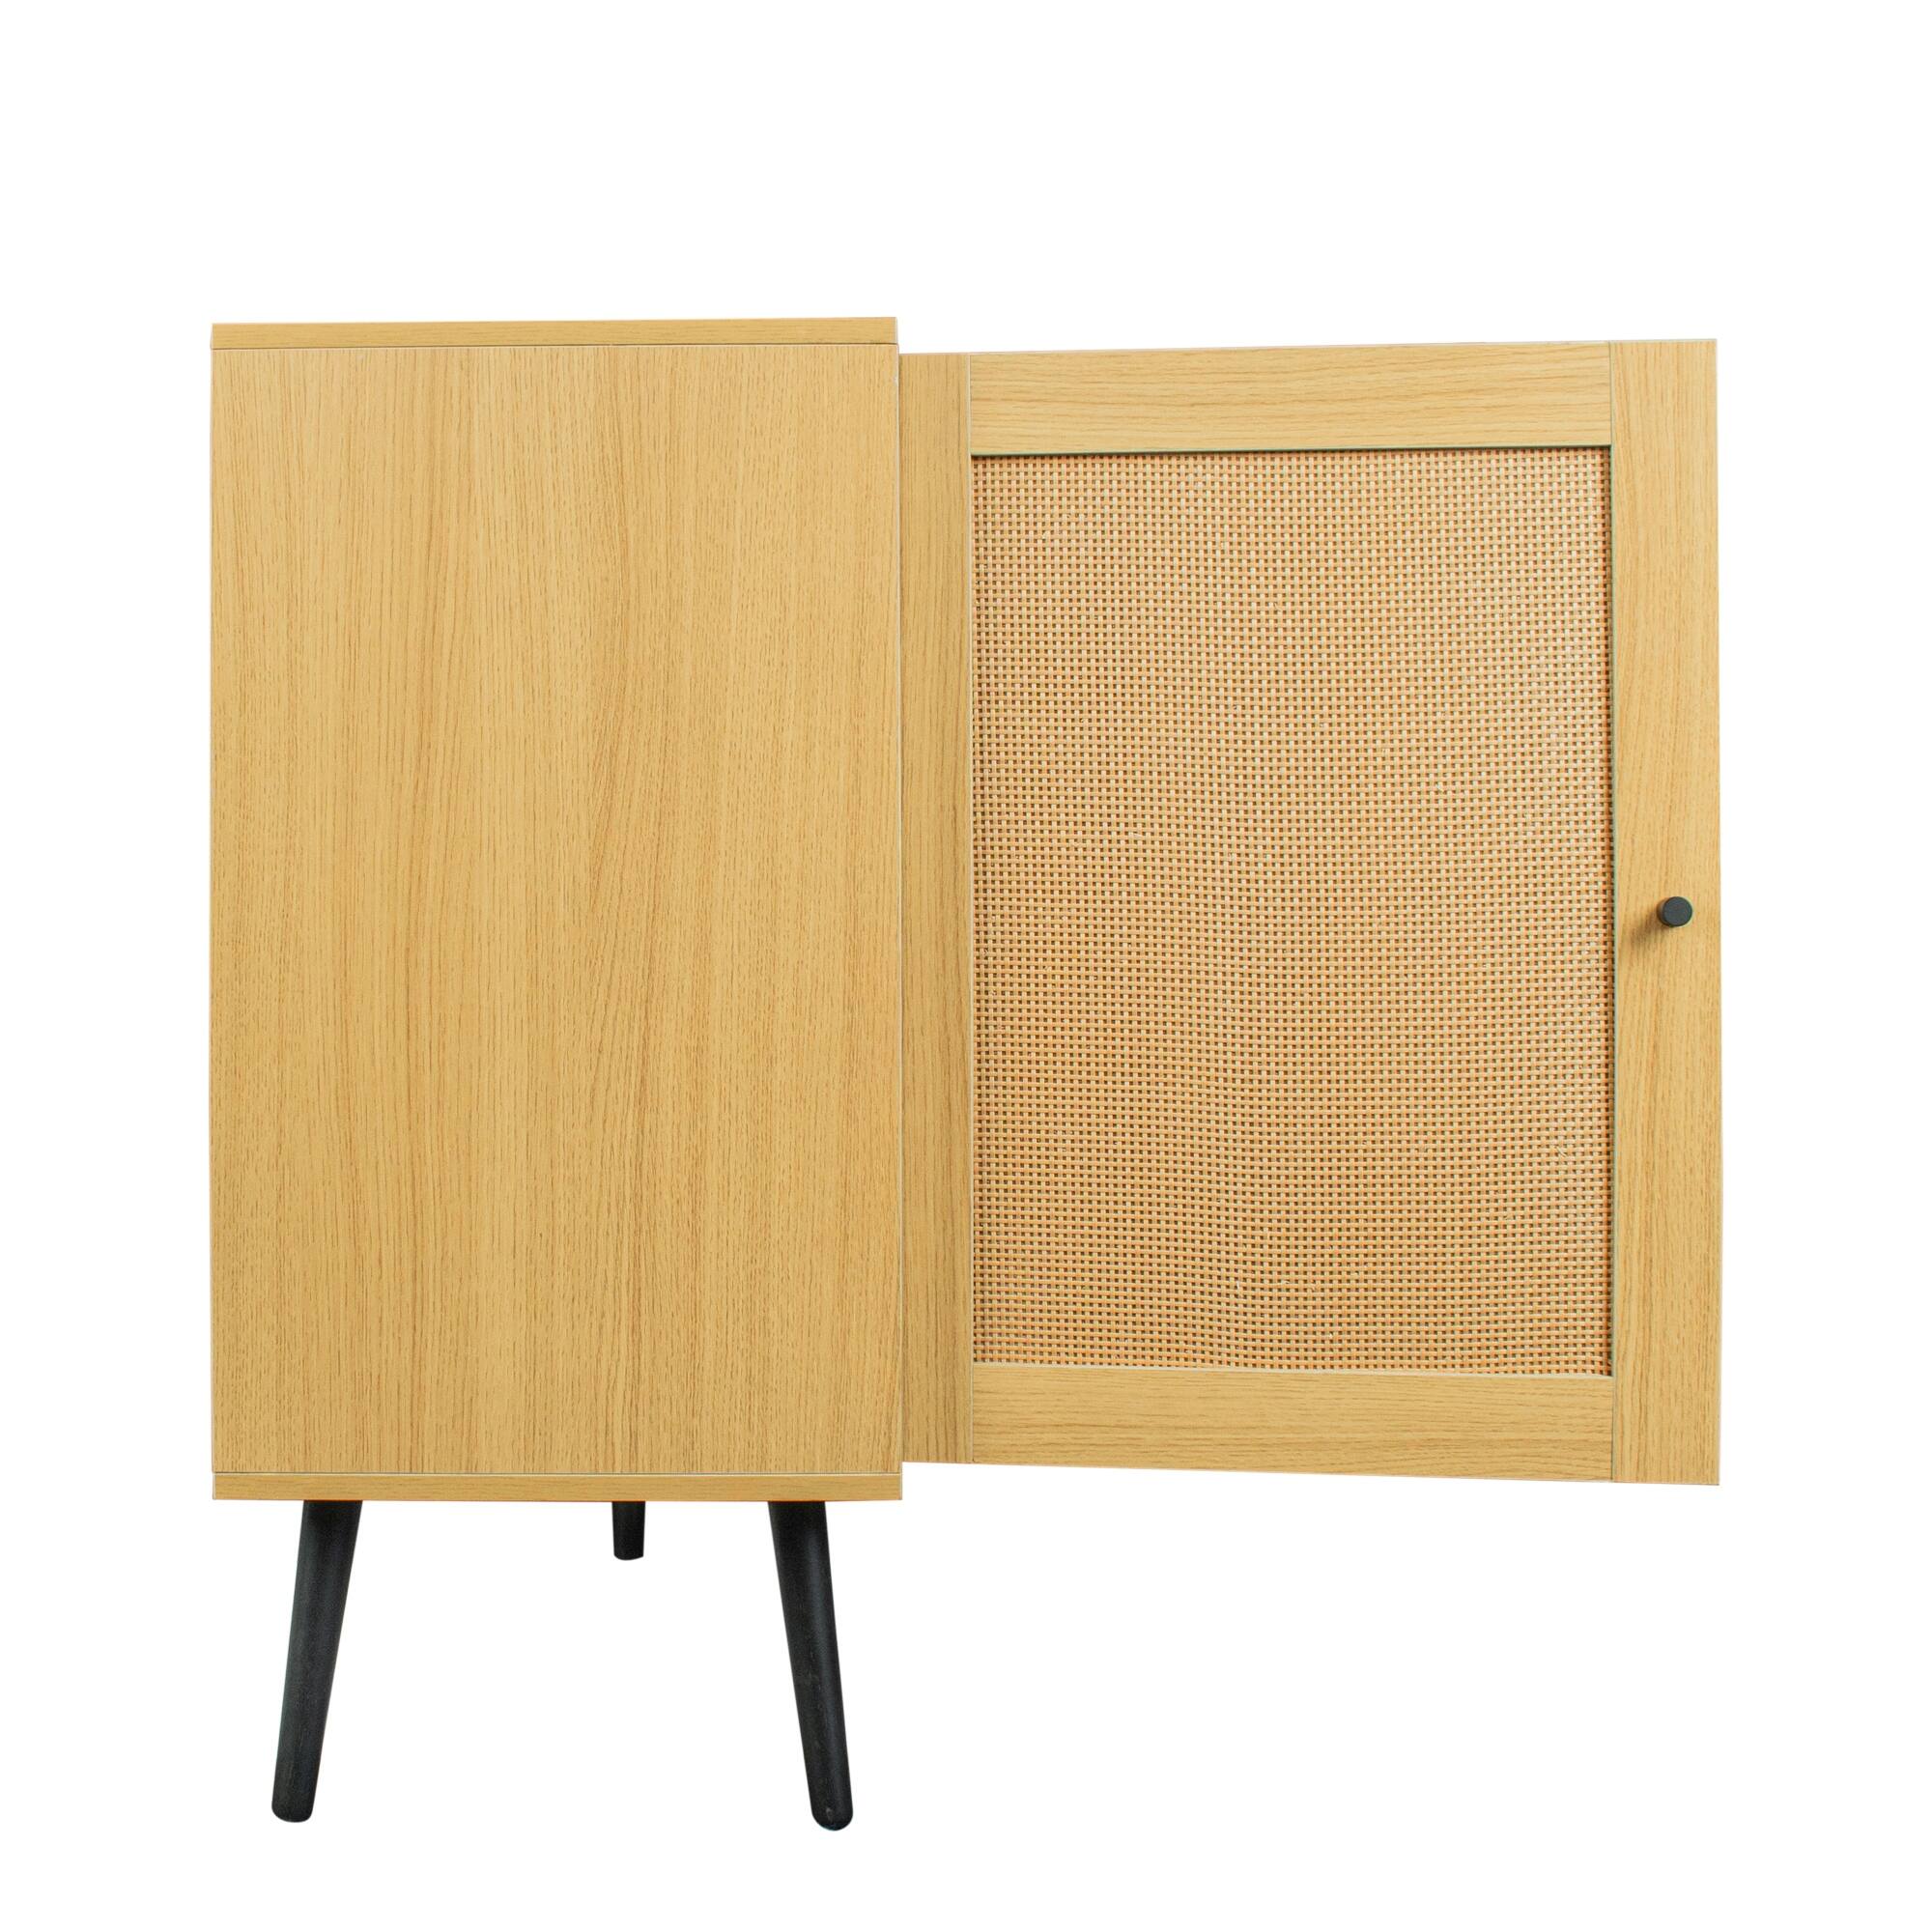 Wood Sideboard Storage Cabinet with 4 Roomy Drawers and Small Cabinet